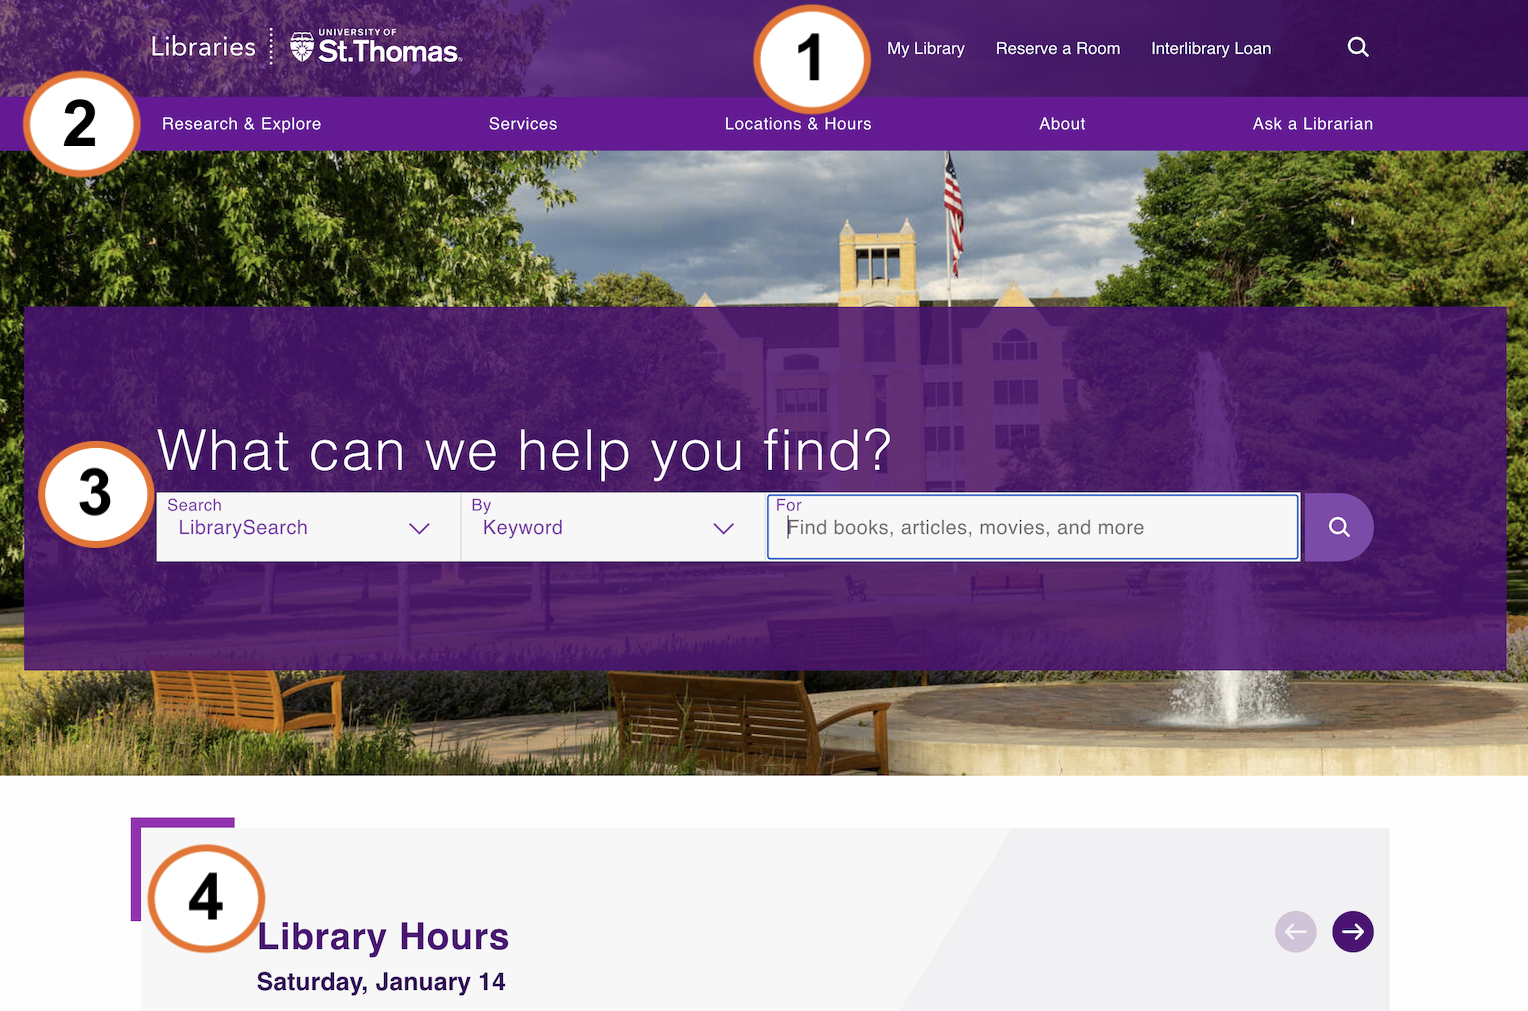 Image of Library Home Page